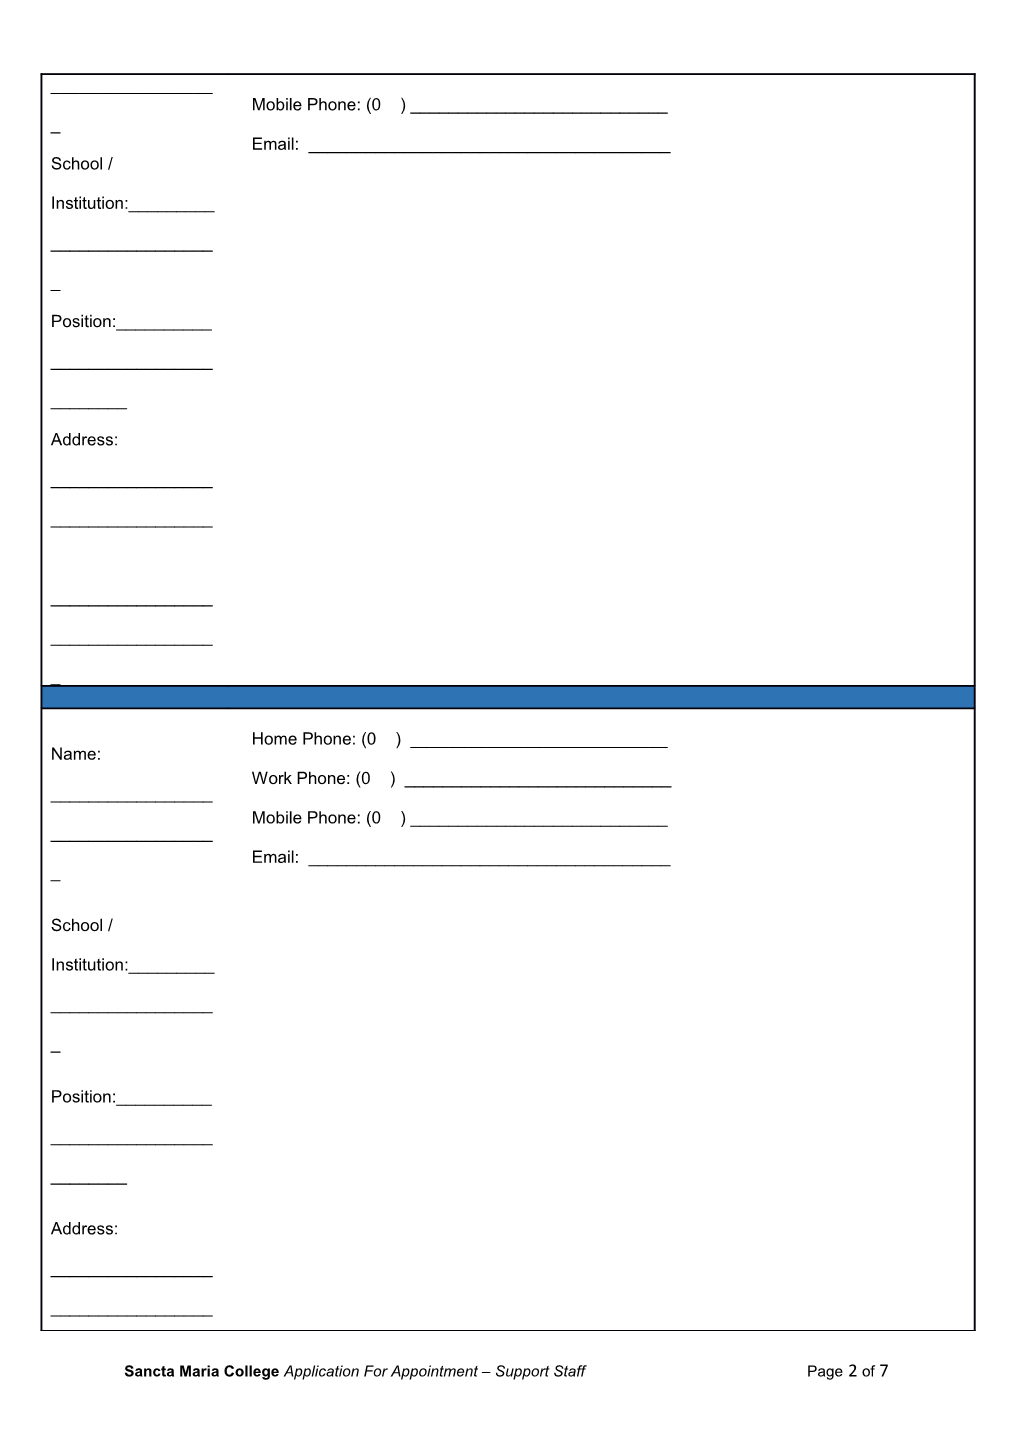 Application Form for Position Of